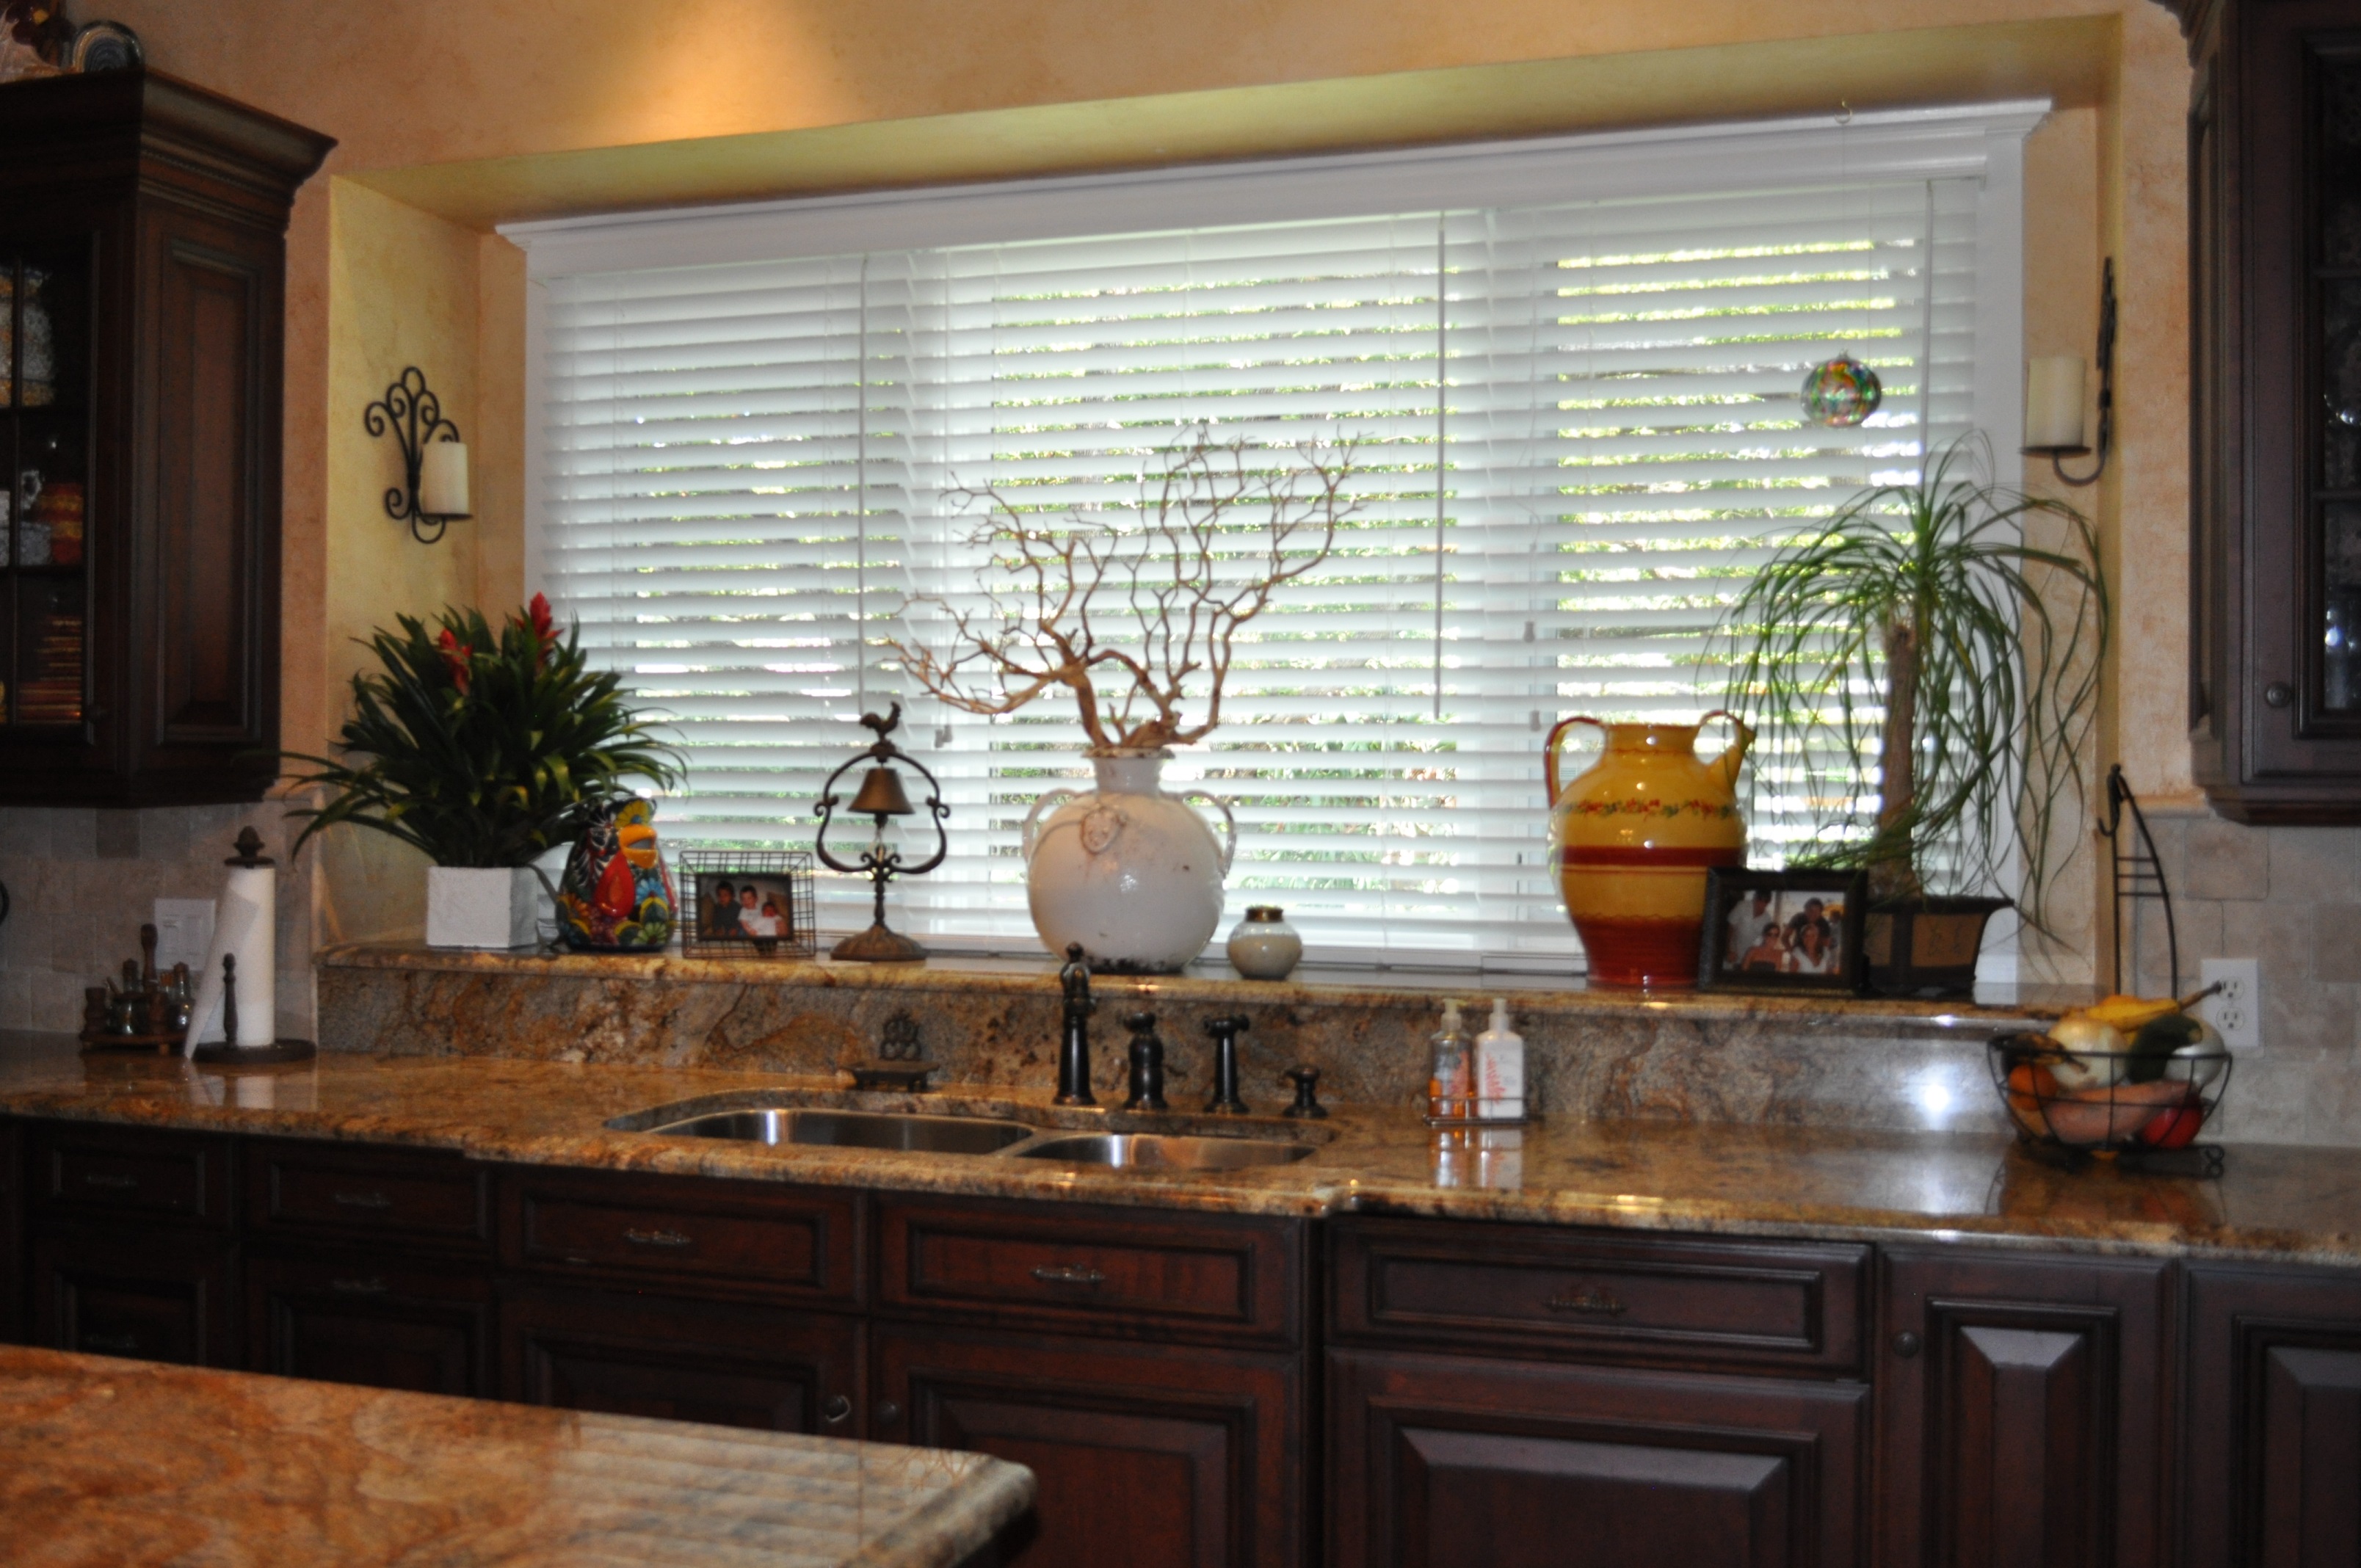 plantation shutters Sumter County, window blinds, roller shades